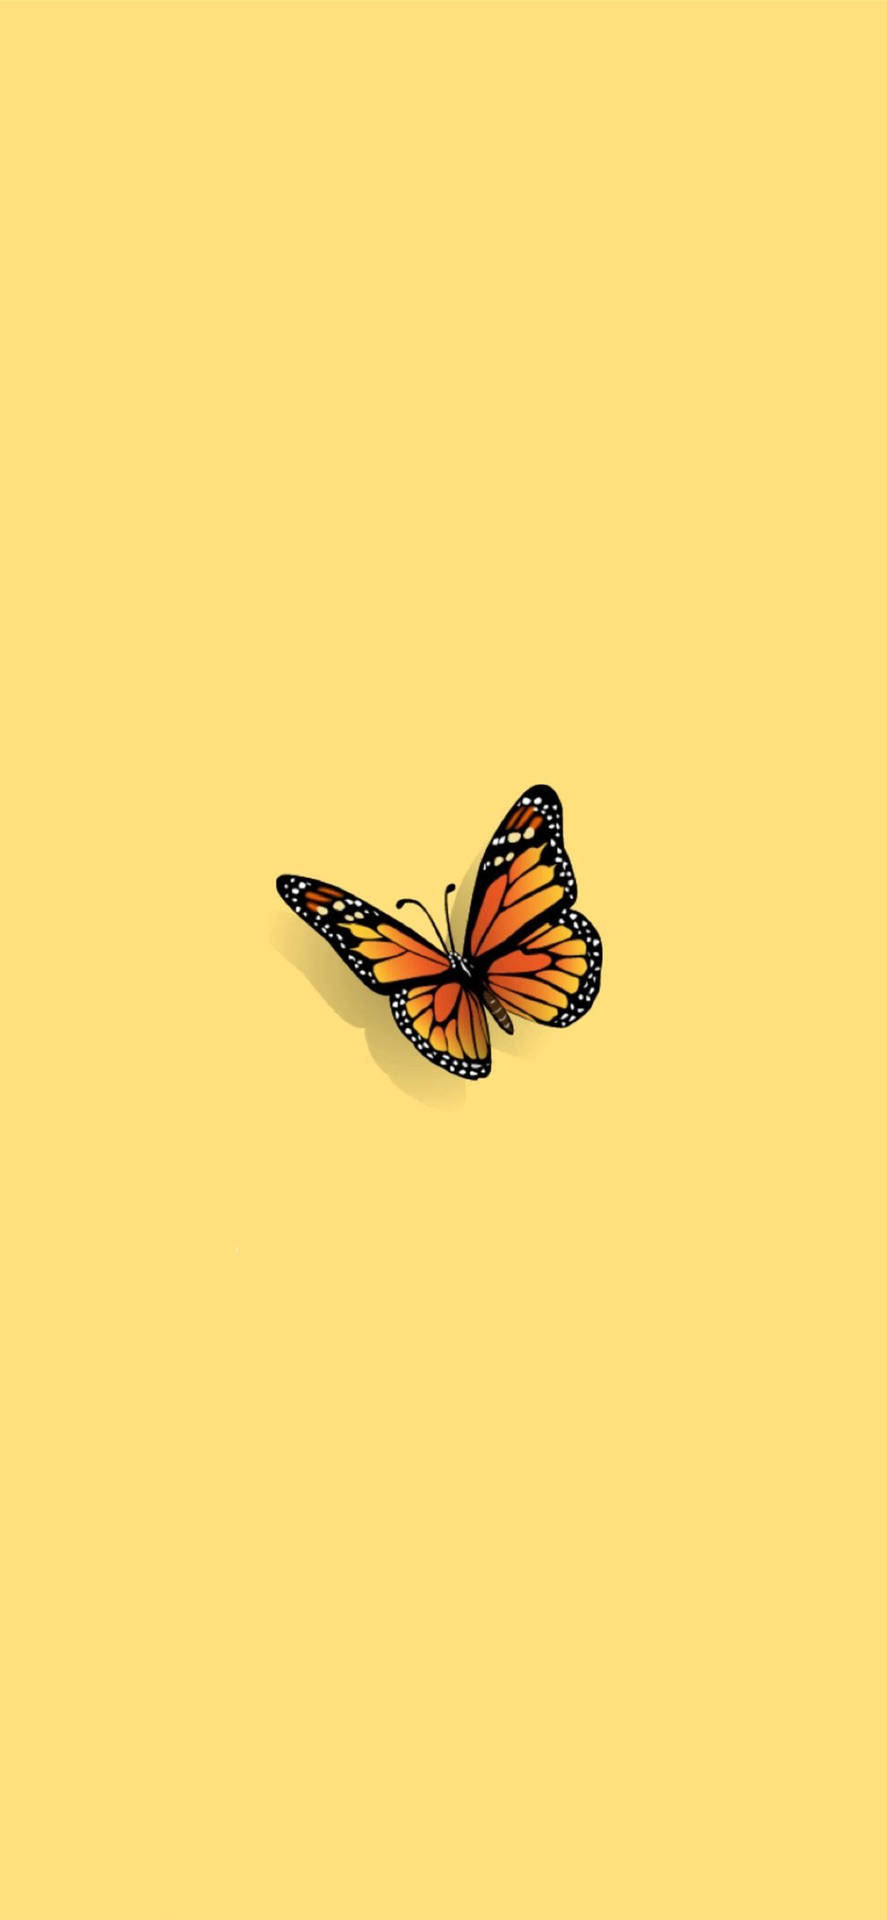 Stylish Butterfly Iphone Screen Background Wallpaper